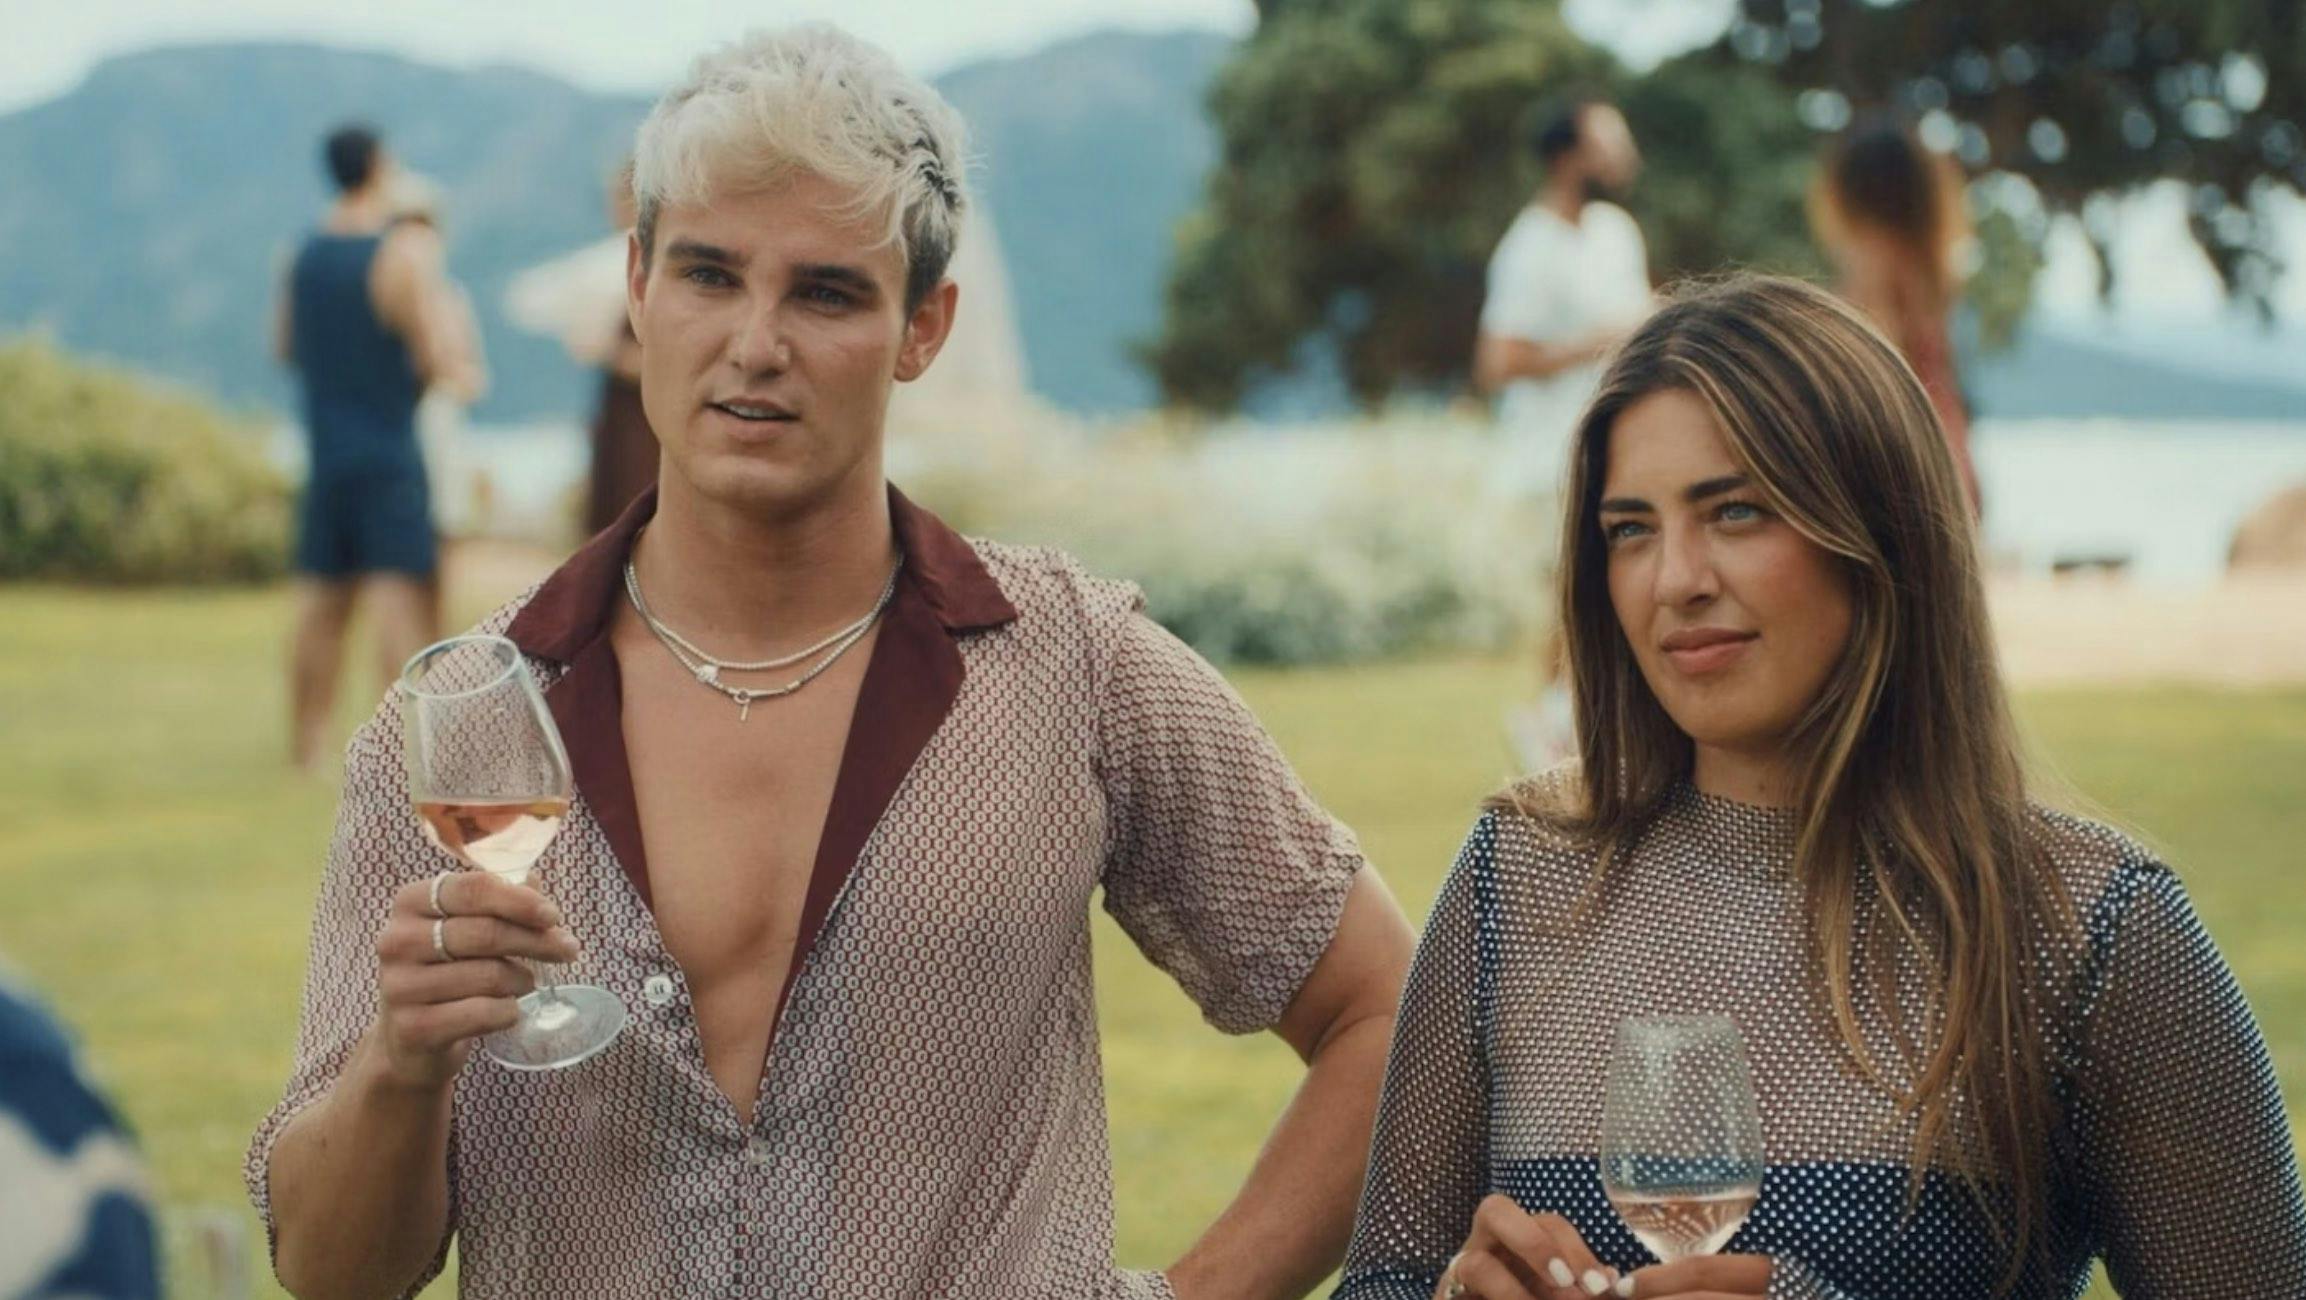 Made In Chelsea: Are Sam Prince And Yasmine Zweegers Still Together?